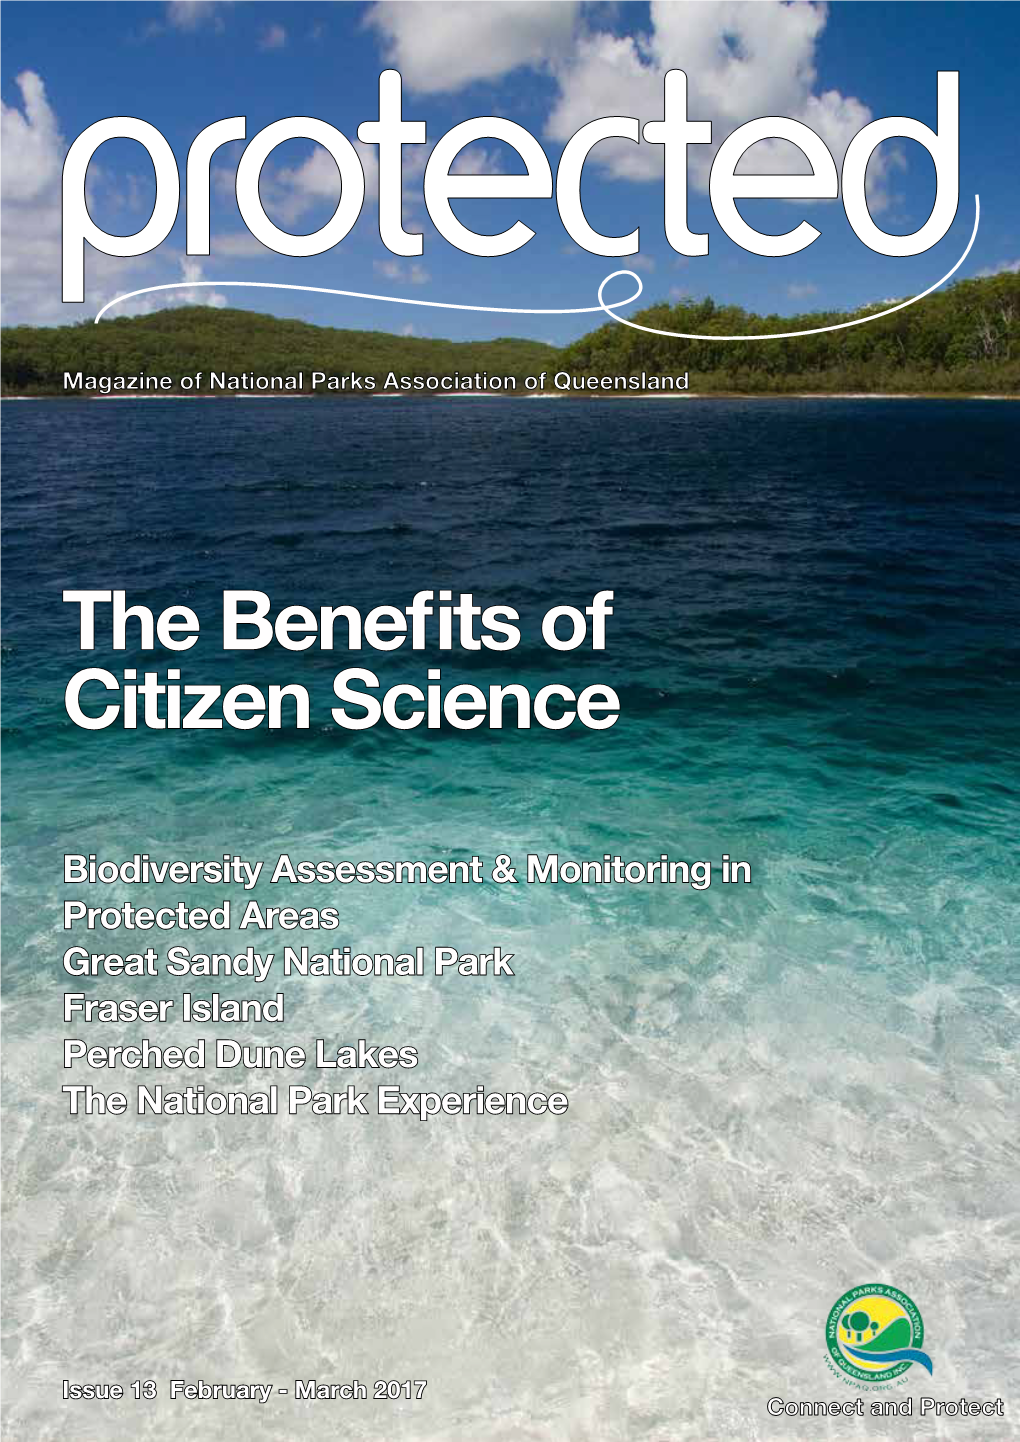 The Benefits of Citizen Science